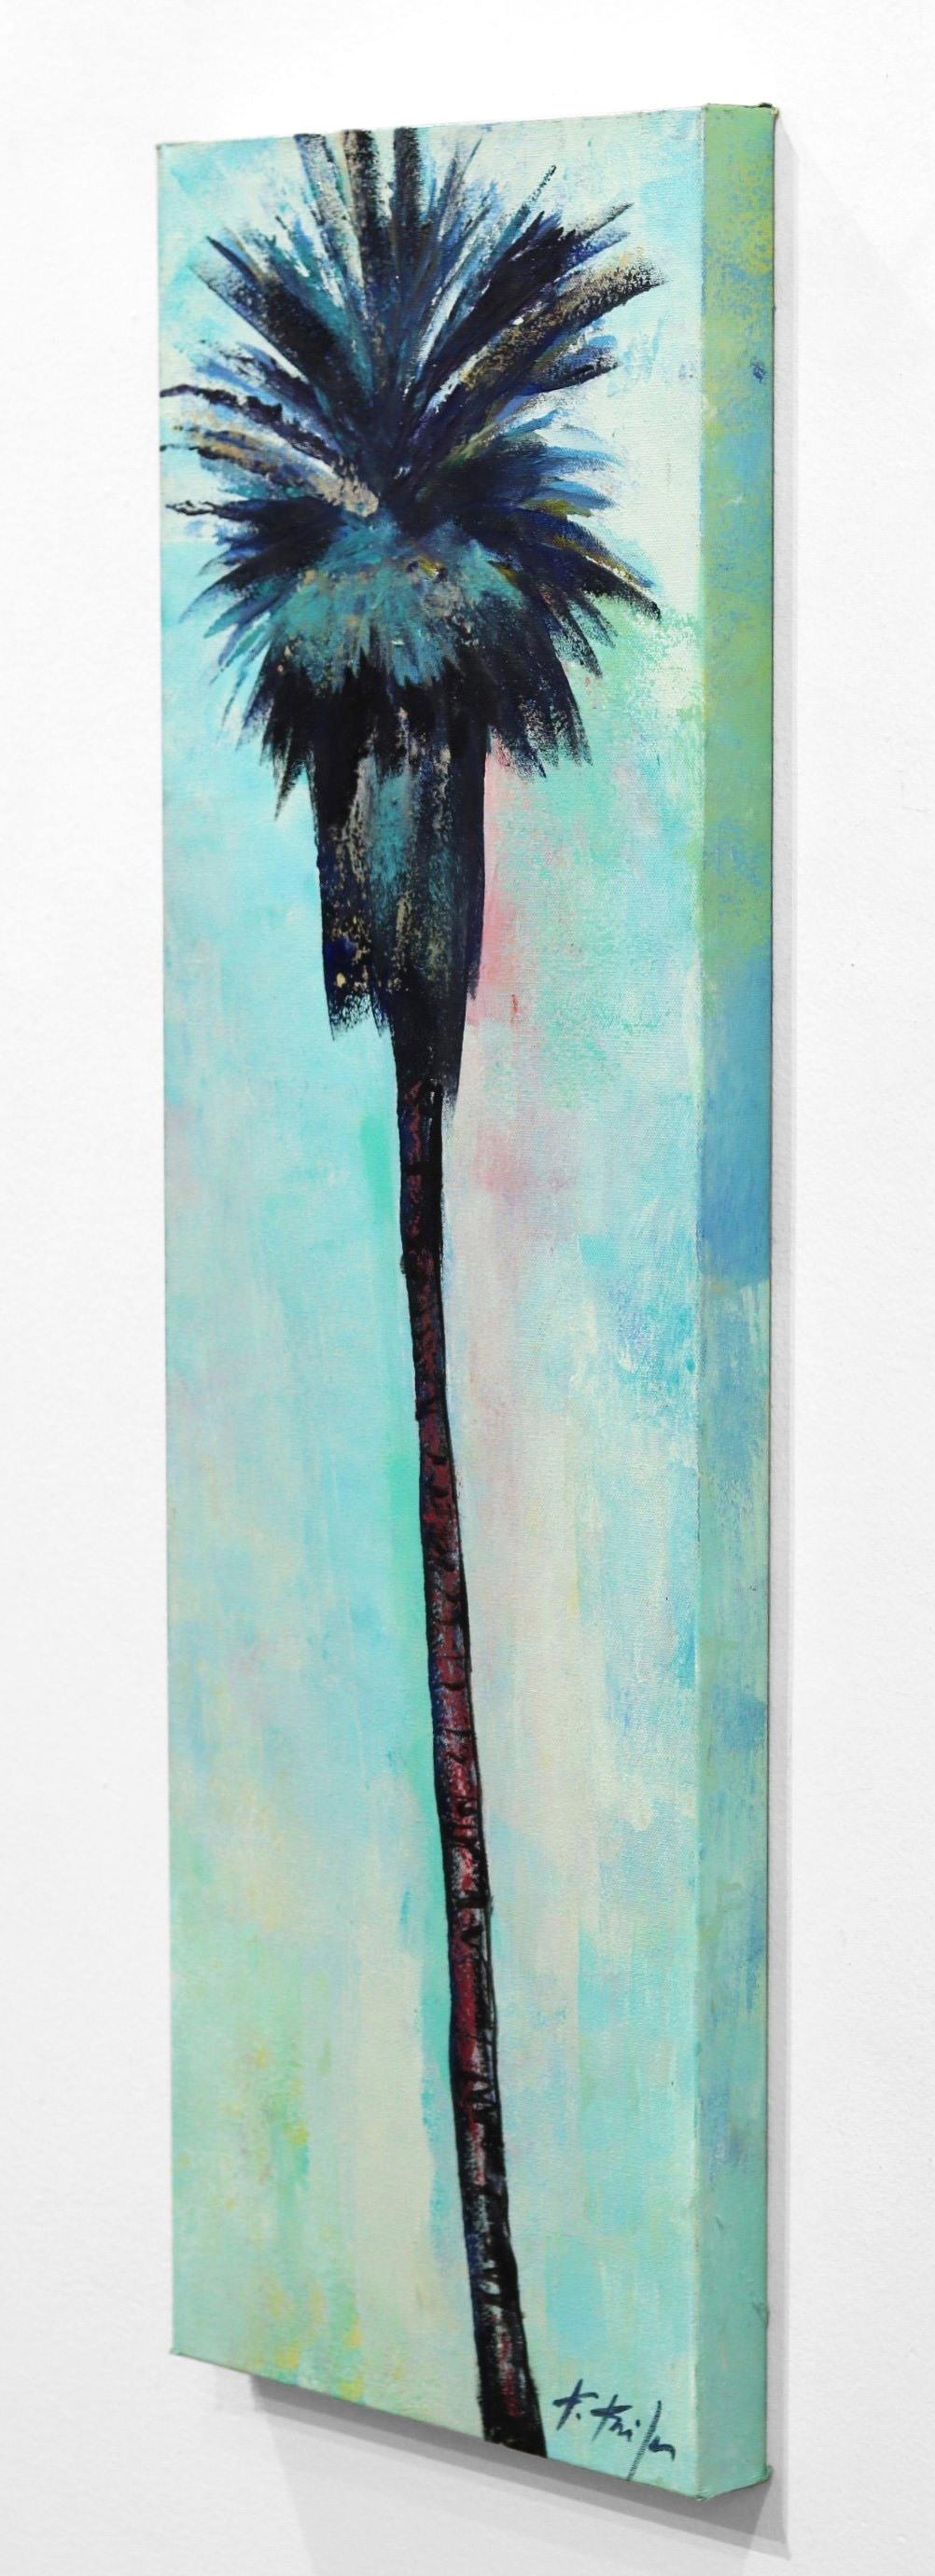 Easy Green - Original Palm Tree Painting on Turquoise Sky For Sale 2